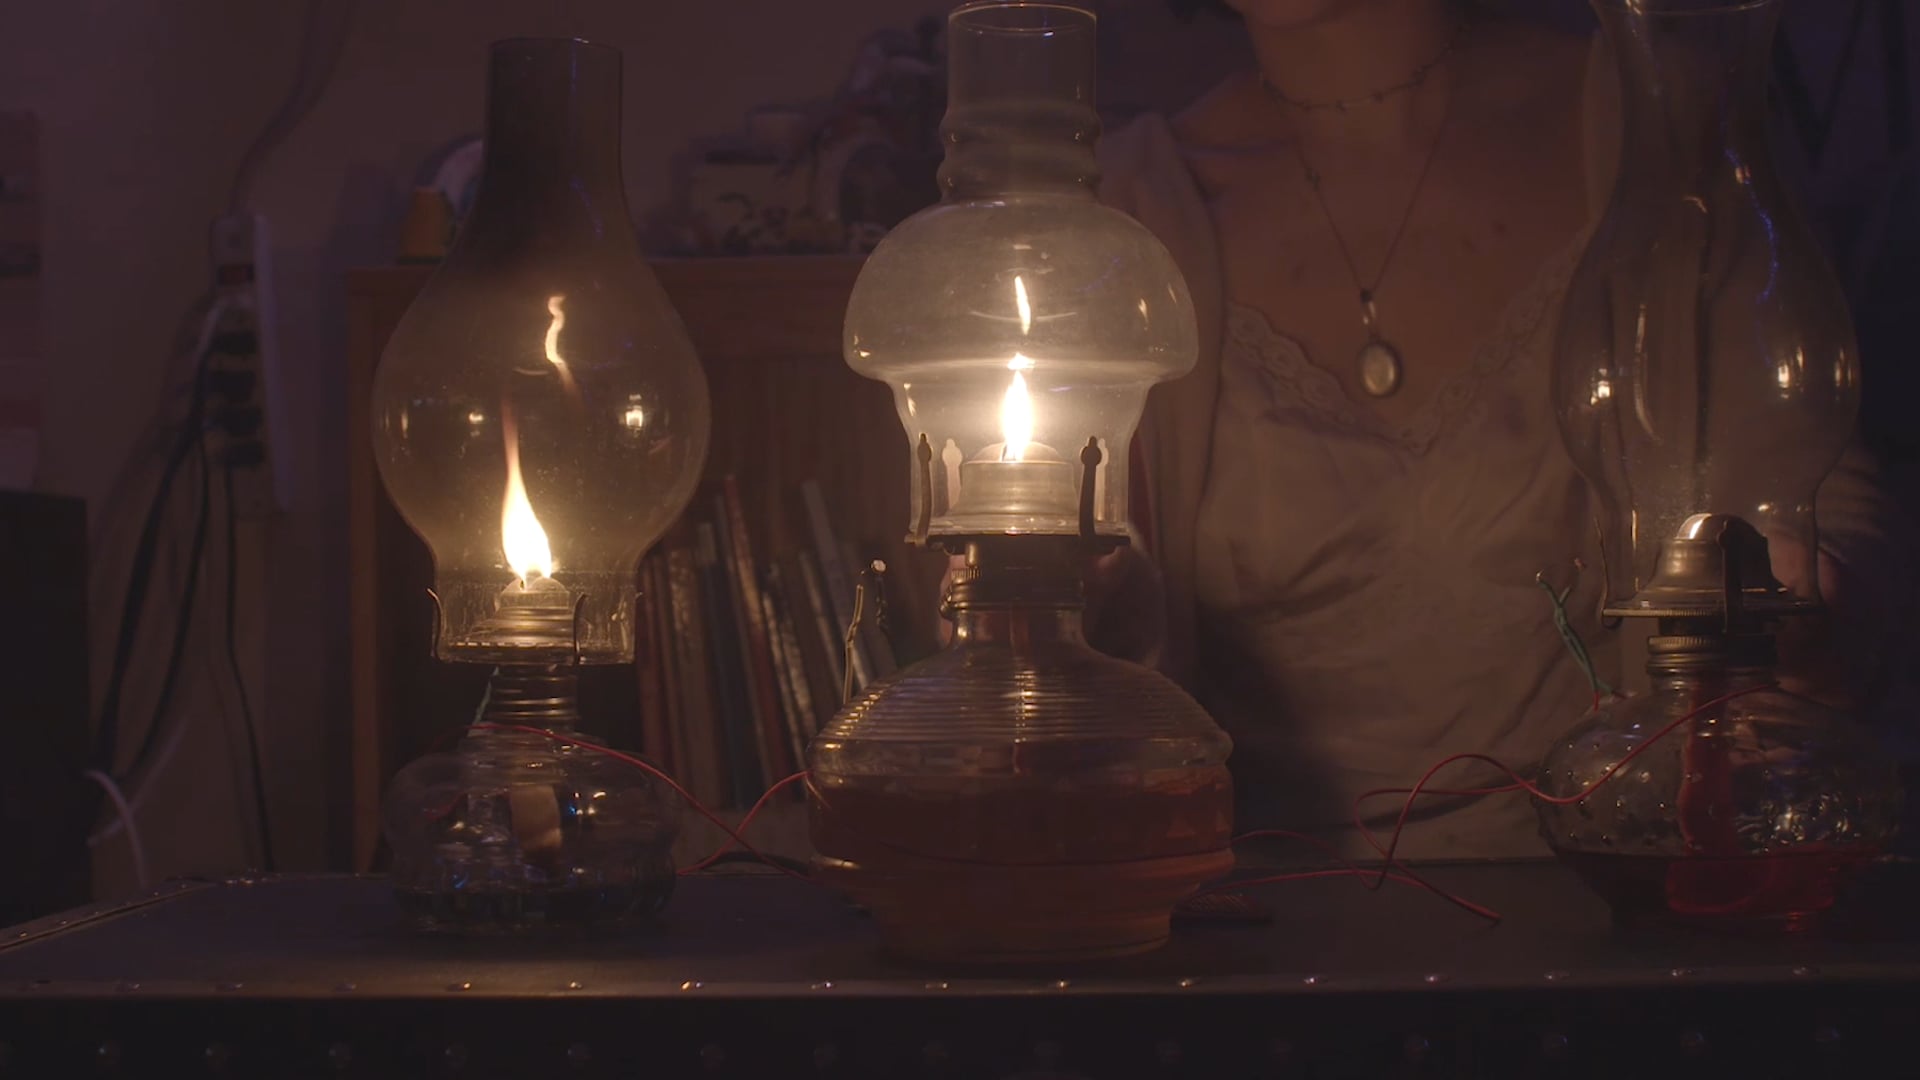 Reverie for oil lamps, live electronics (2020)